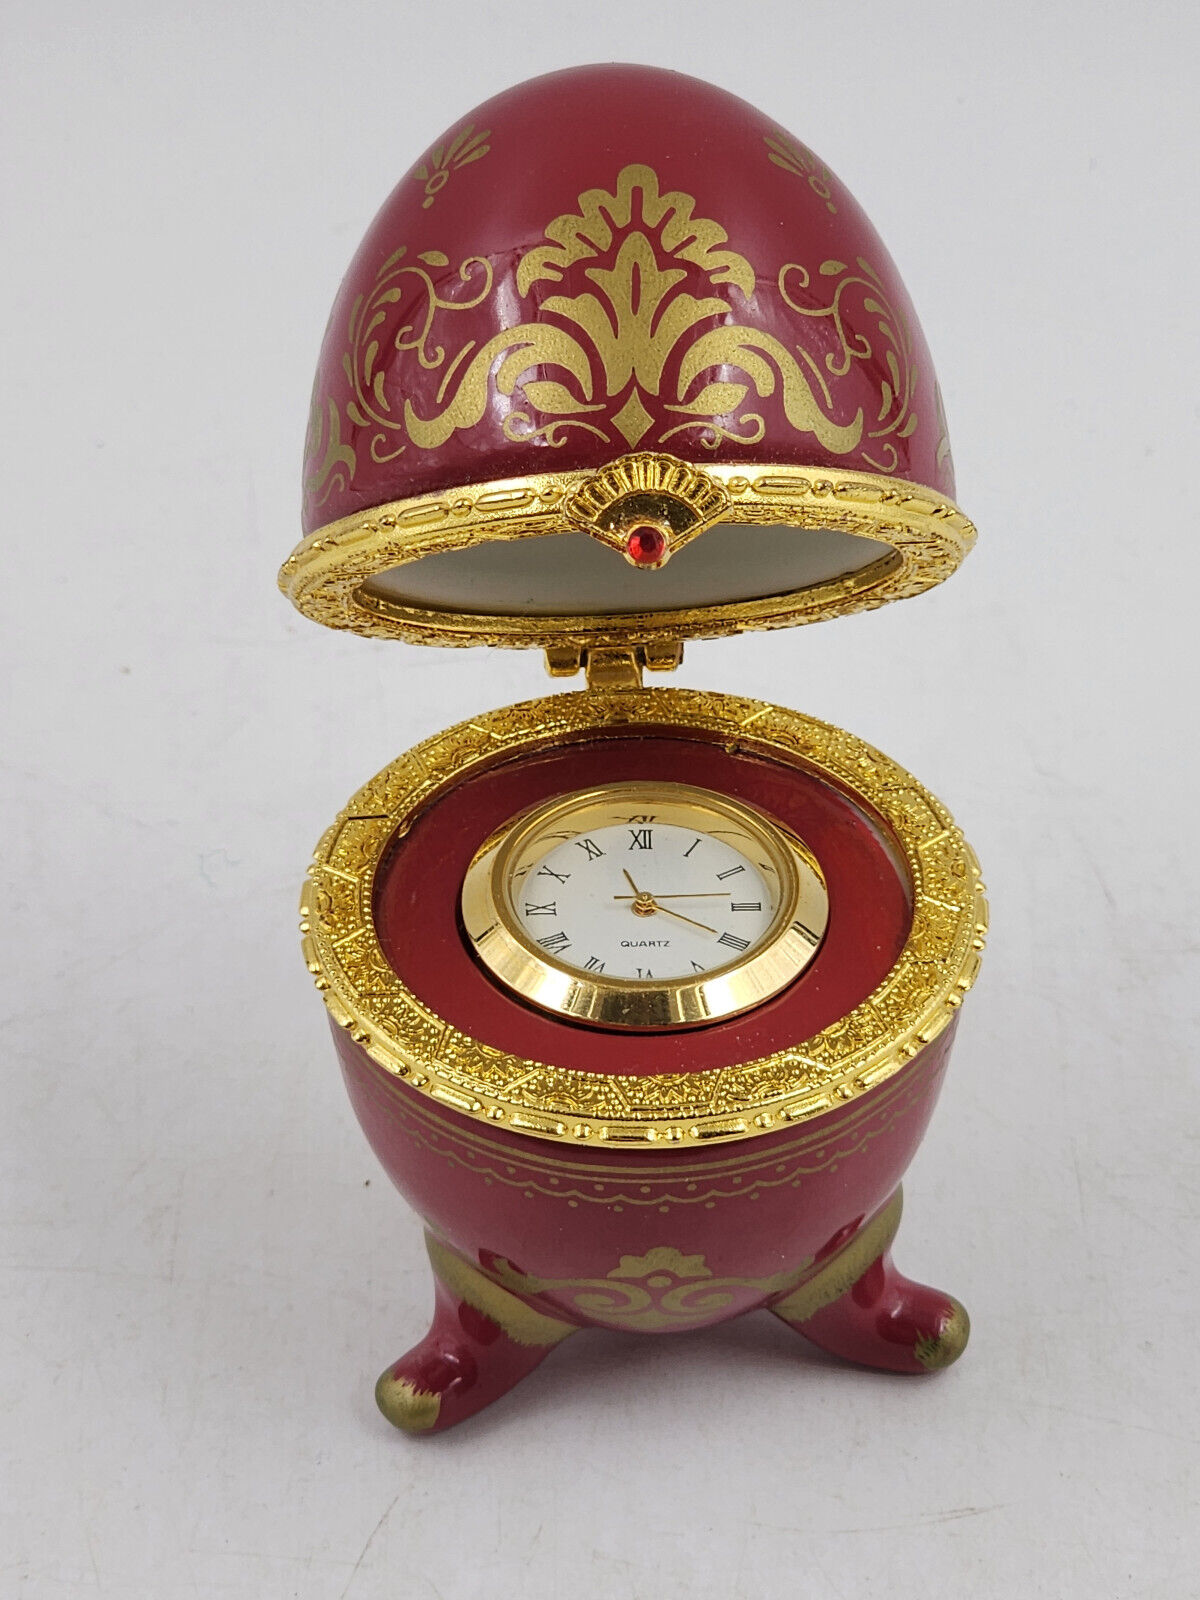 Porcelain Footed Egg with Clock Egg Made in Japan for Avon WORKS